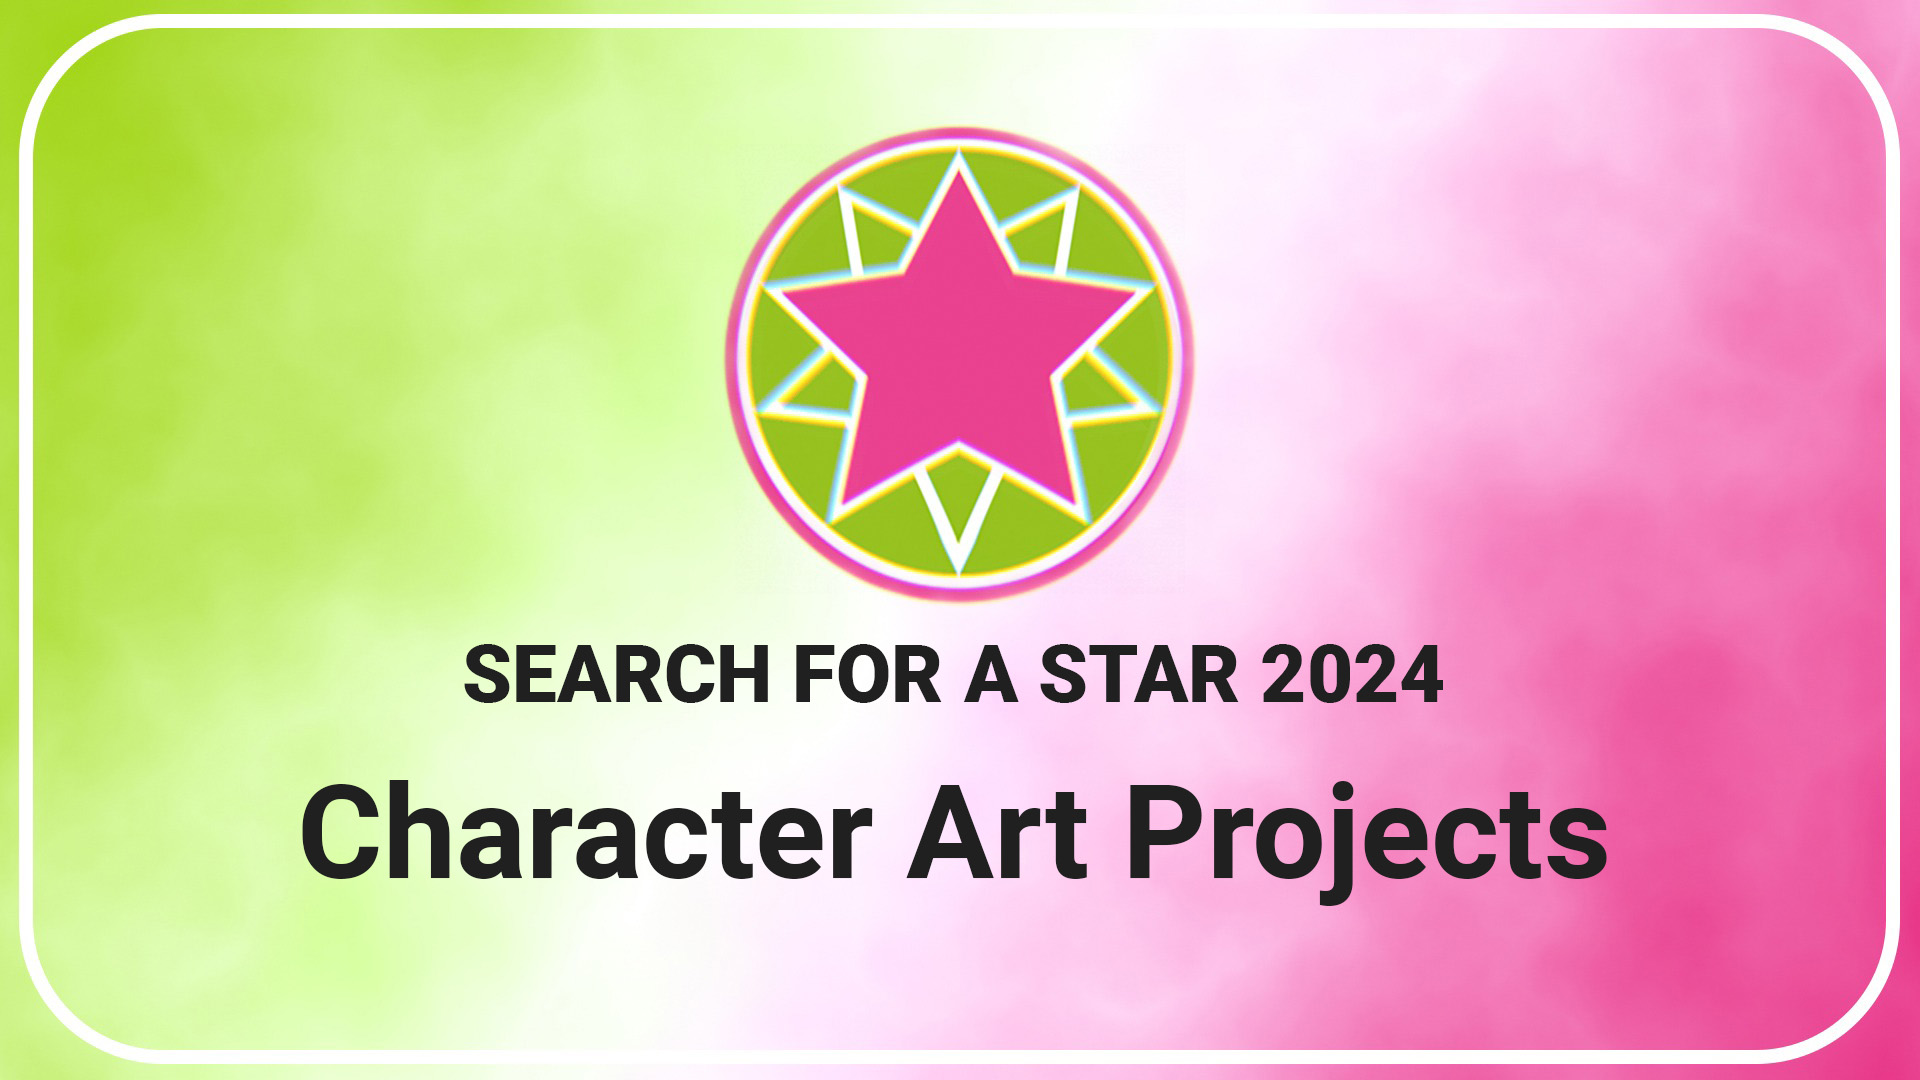 Character Art Projects | Search For A Star 2024